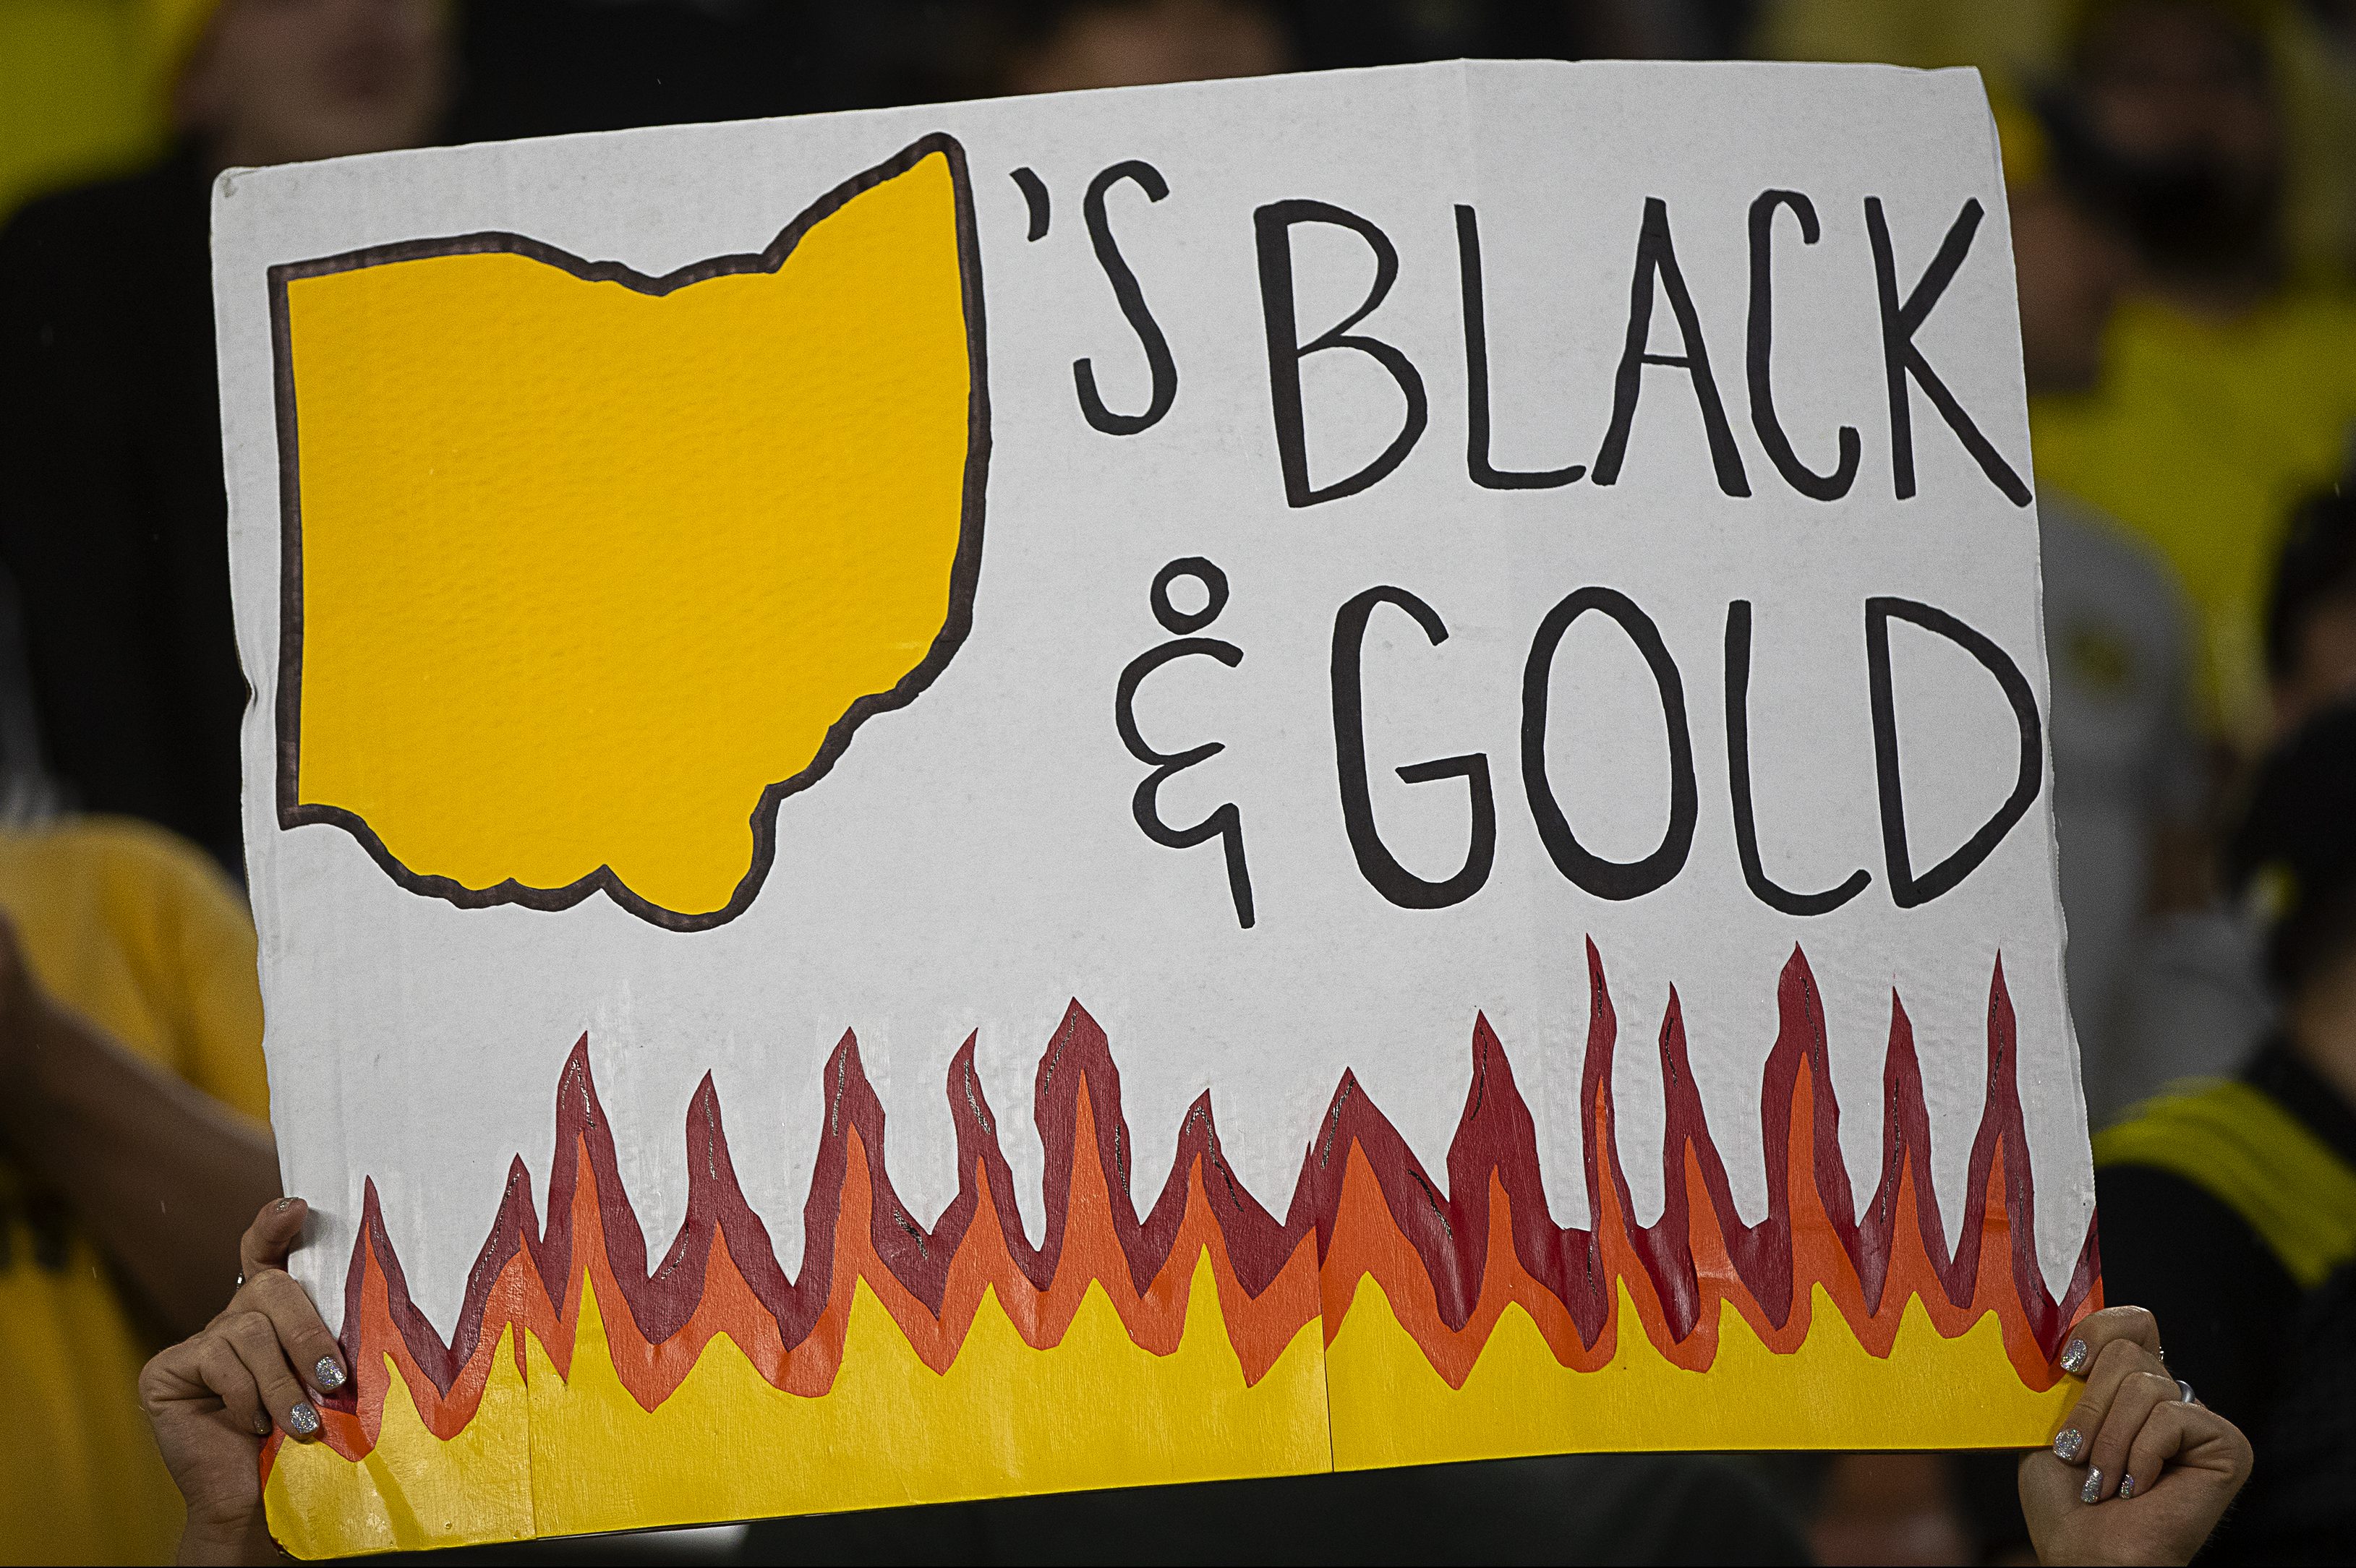 A black-and-gold sign in The Nordecke.